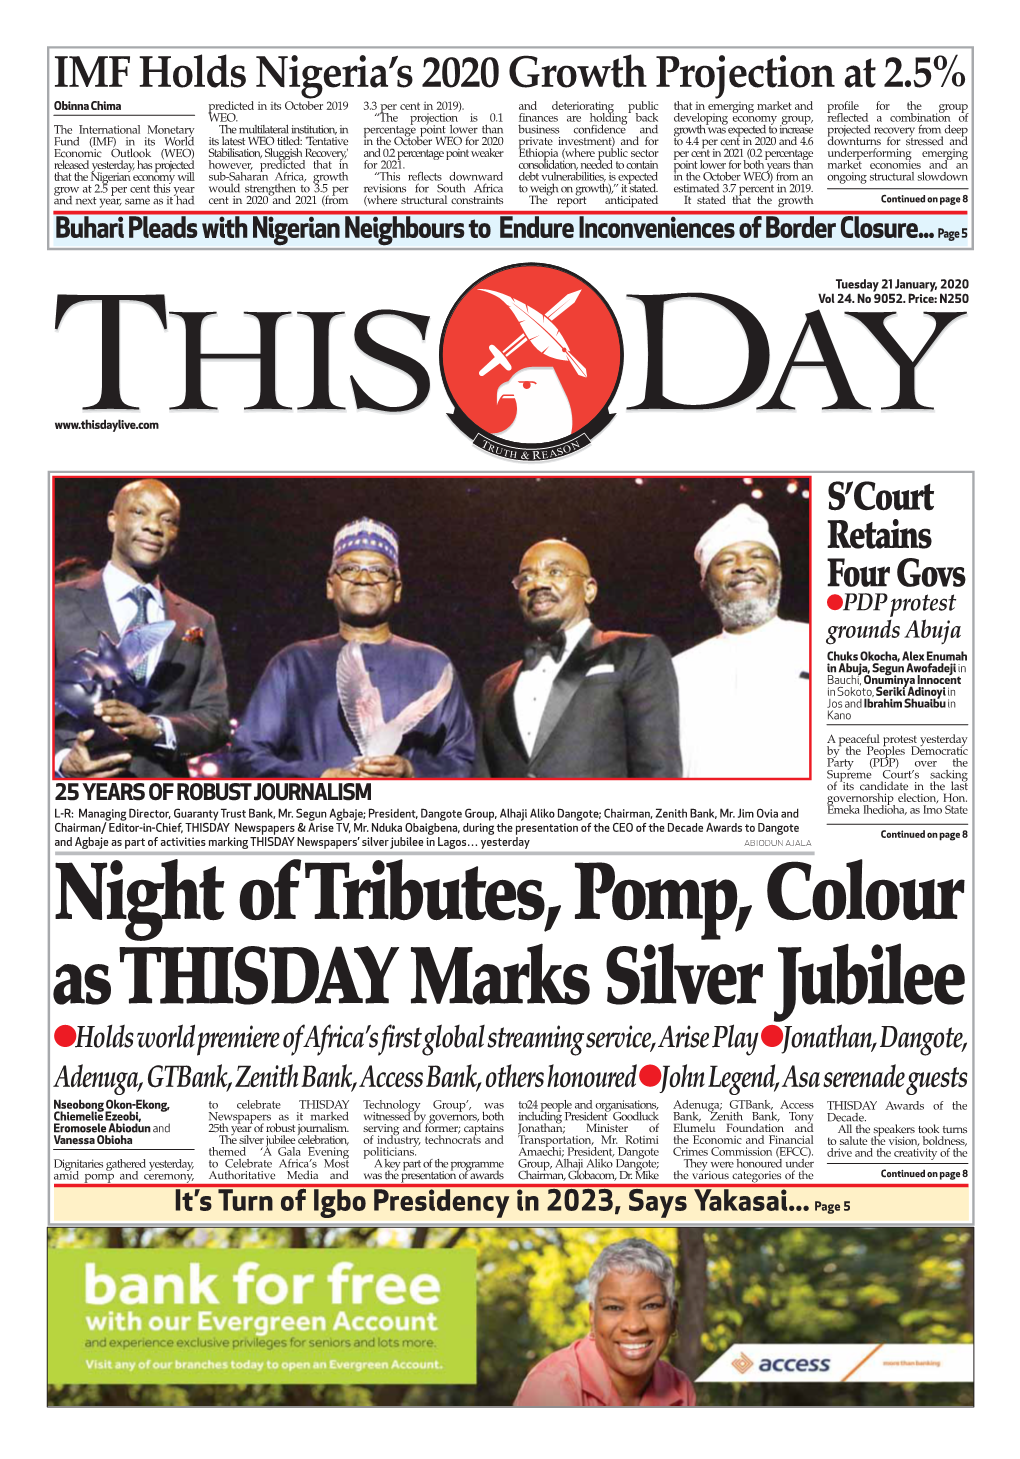 Night of Tributes, Pomp, Colour As THISDAY Marks Silver Jubilee